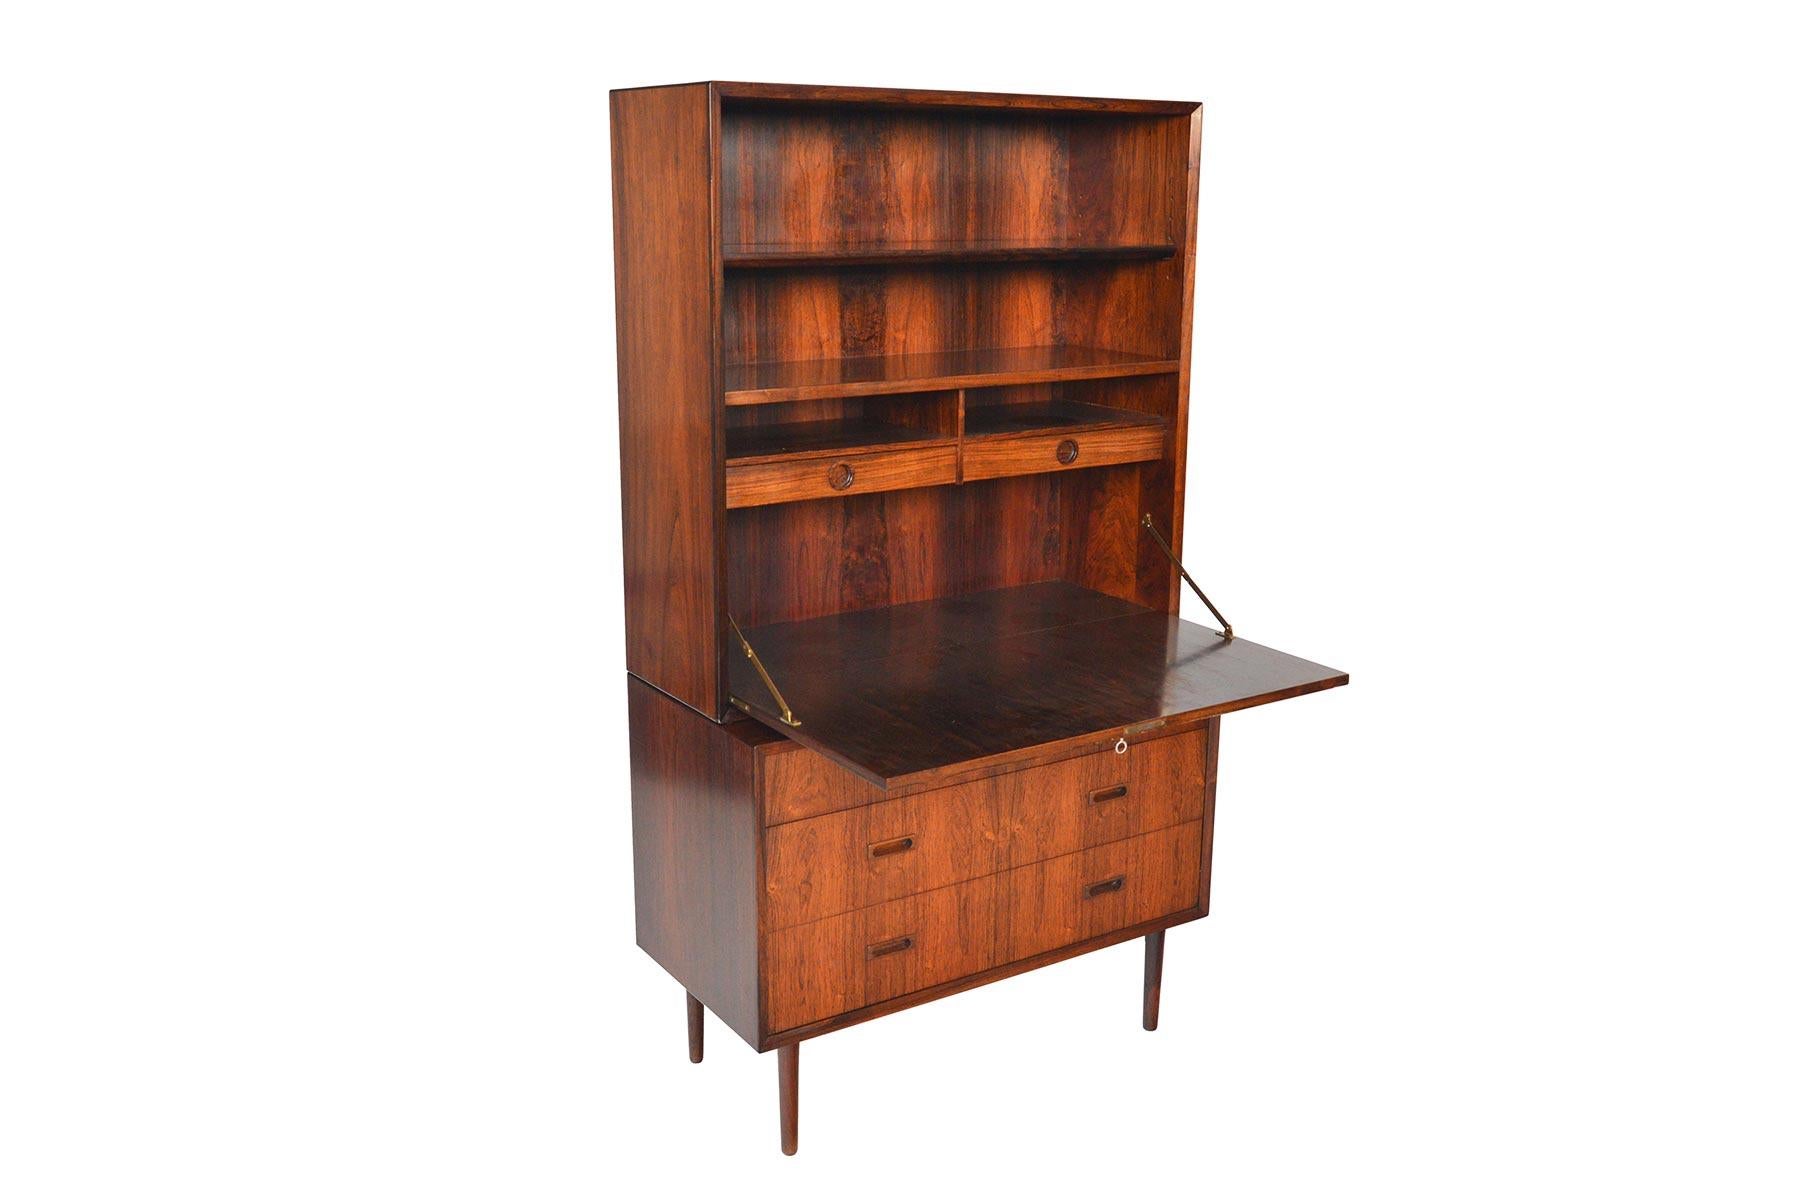 This versatile storage piece was manufactured by Lyby in the 1960s. Beautifully crafted the base of this piece is a four drawer gentleman’s chest. A removable hutch with a drop down secretary desk sits atop. The locking door opens to reveal two